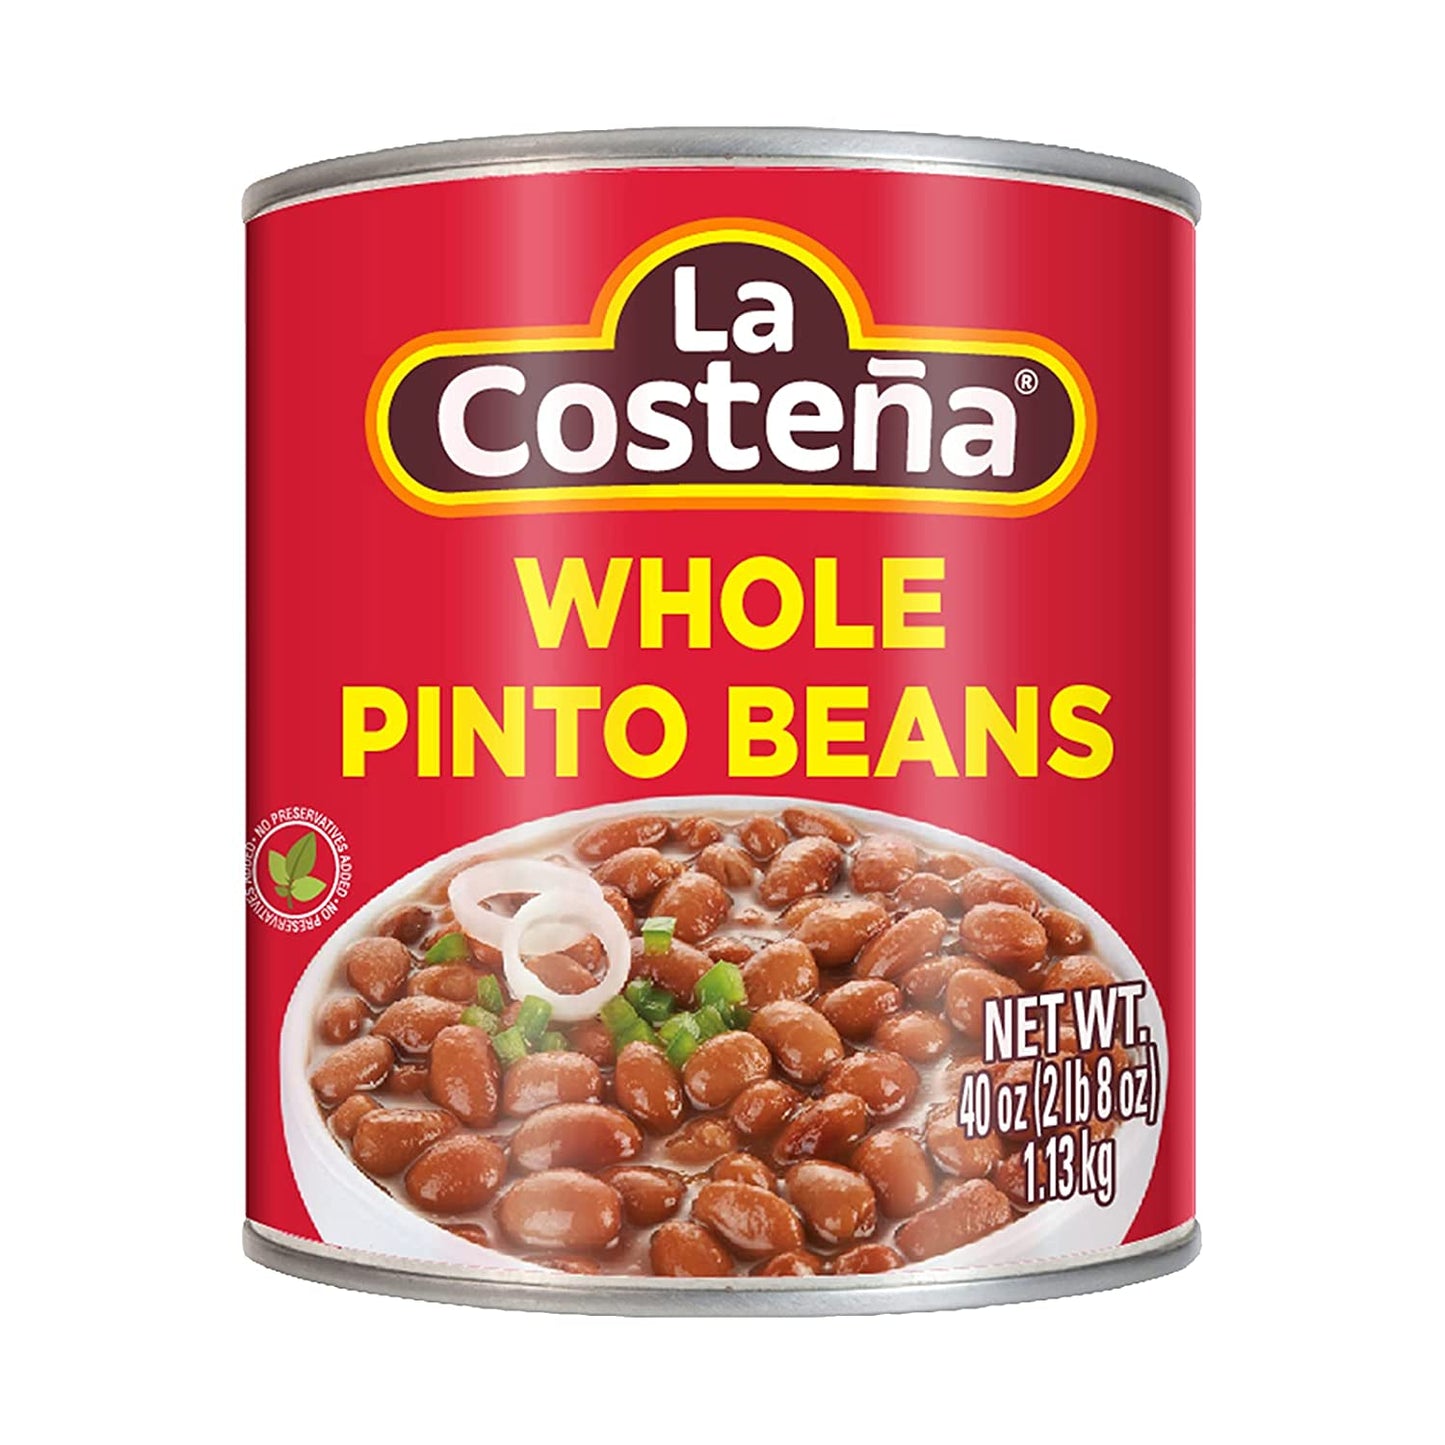 La Costeña Whole Pinto Beans, 40 Ounce Can (Pack of 12)